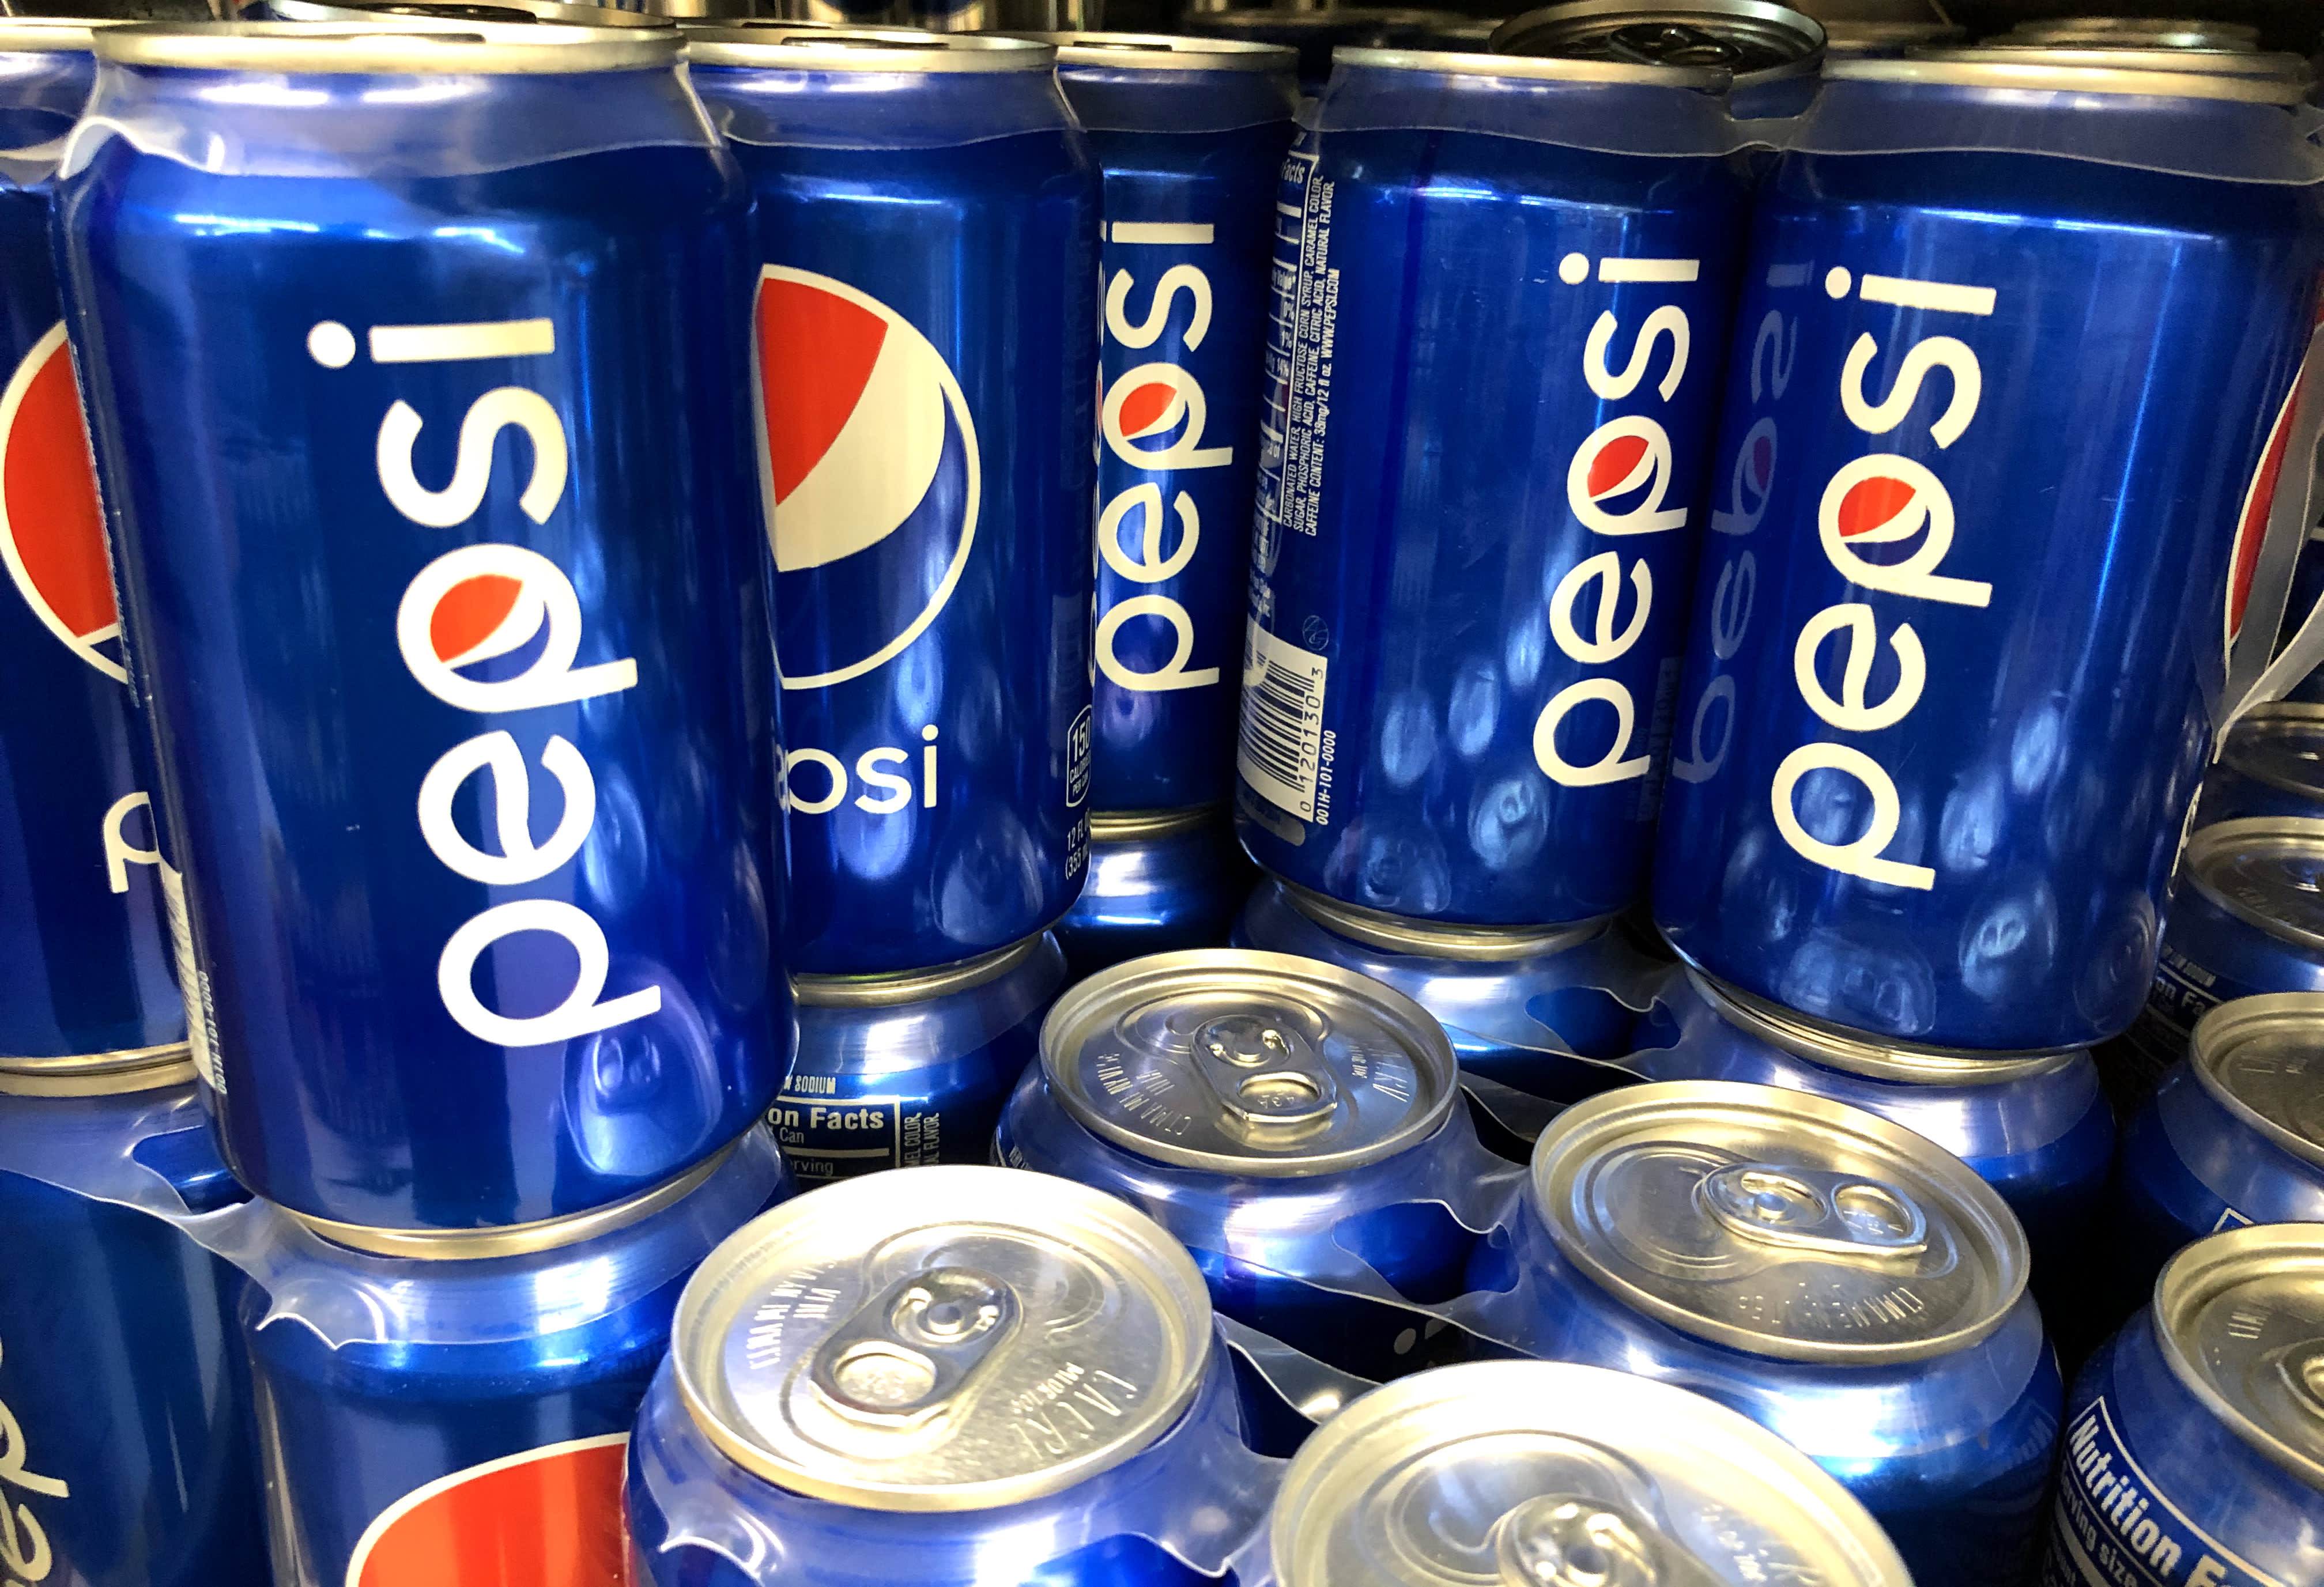 PepsiCo (PEP) Q4 2020 earnings beat projections